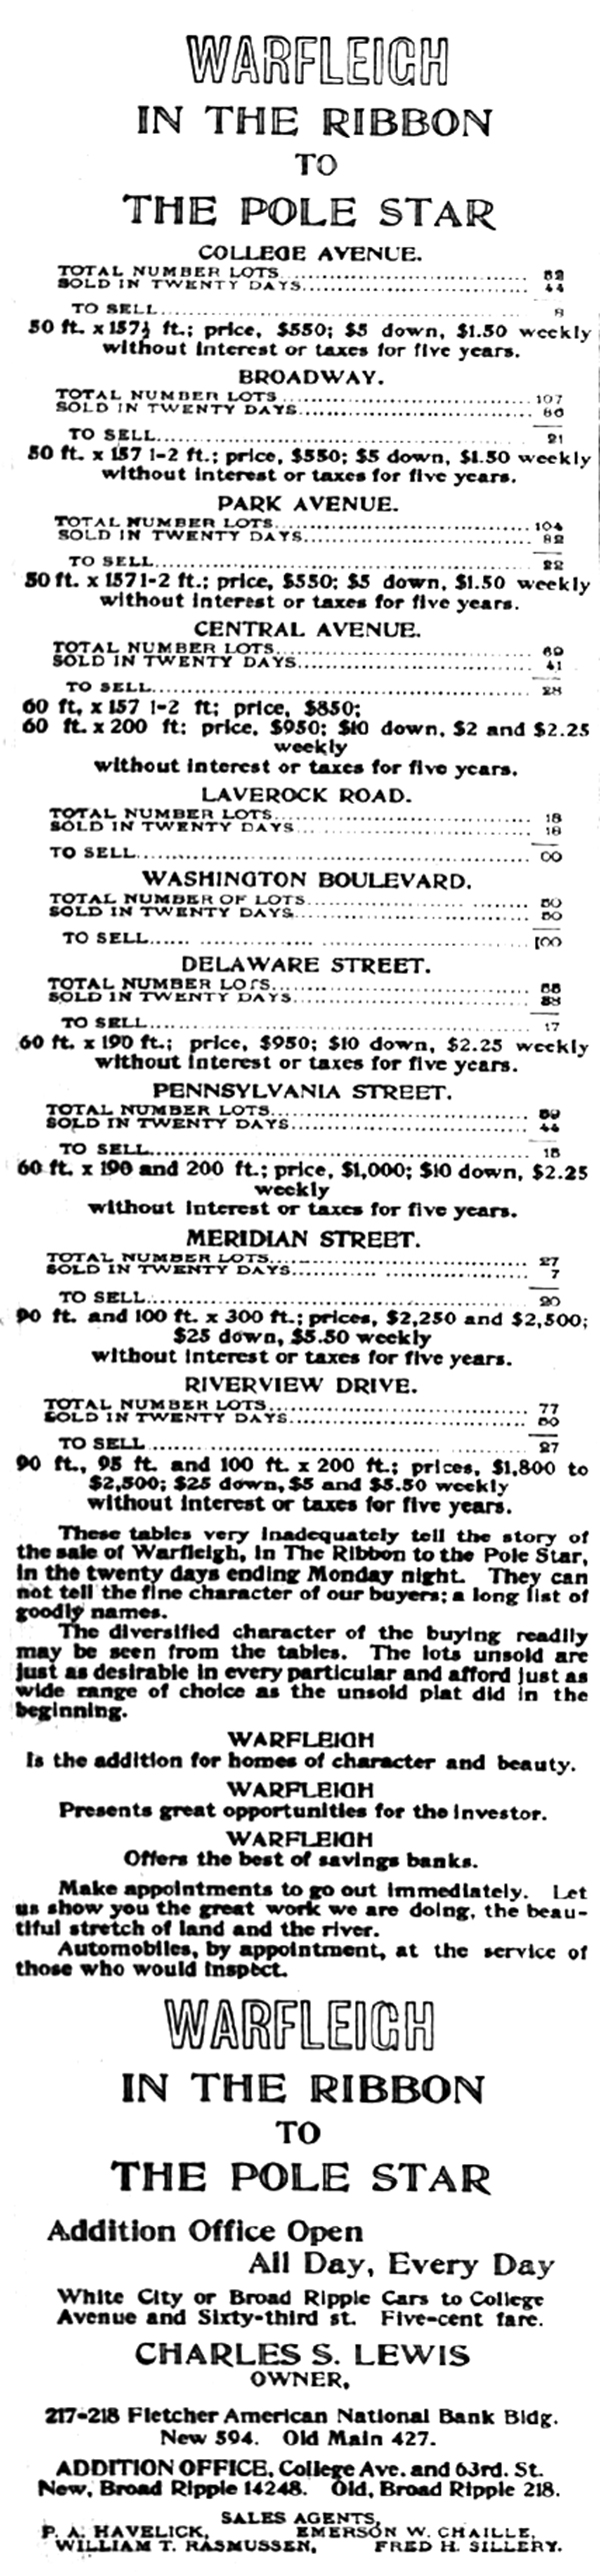 1911 - Warfleigh lots for sale ad